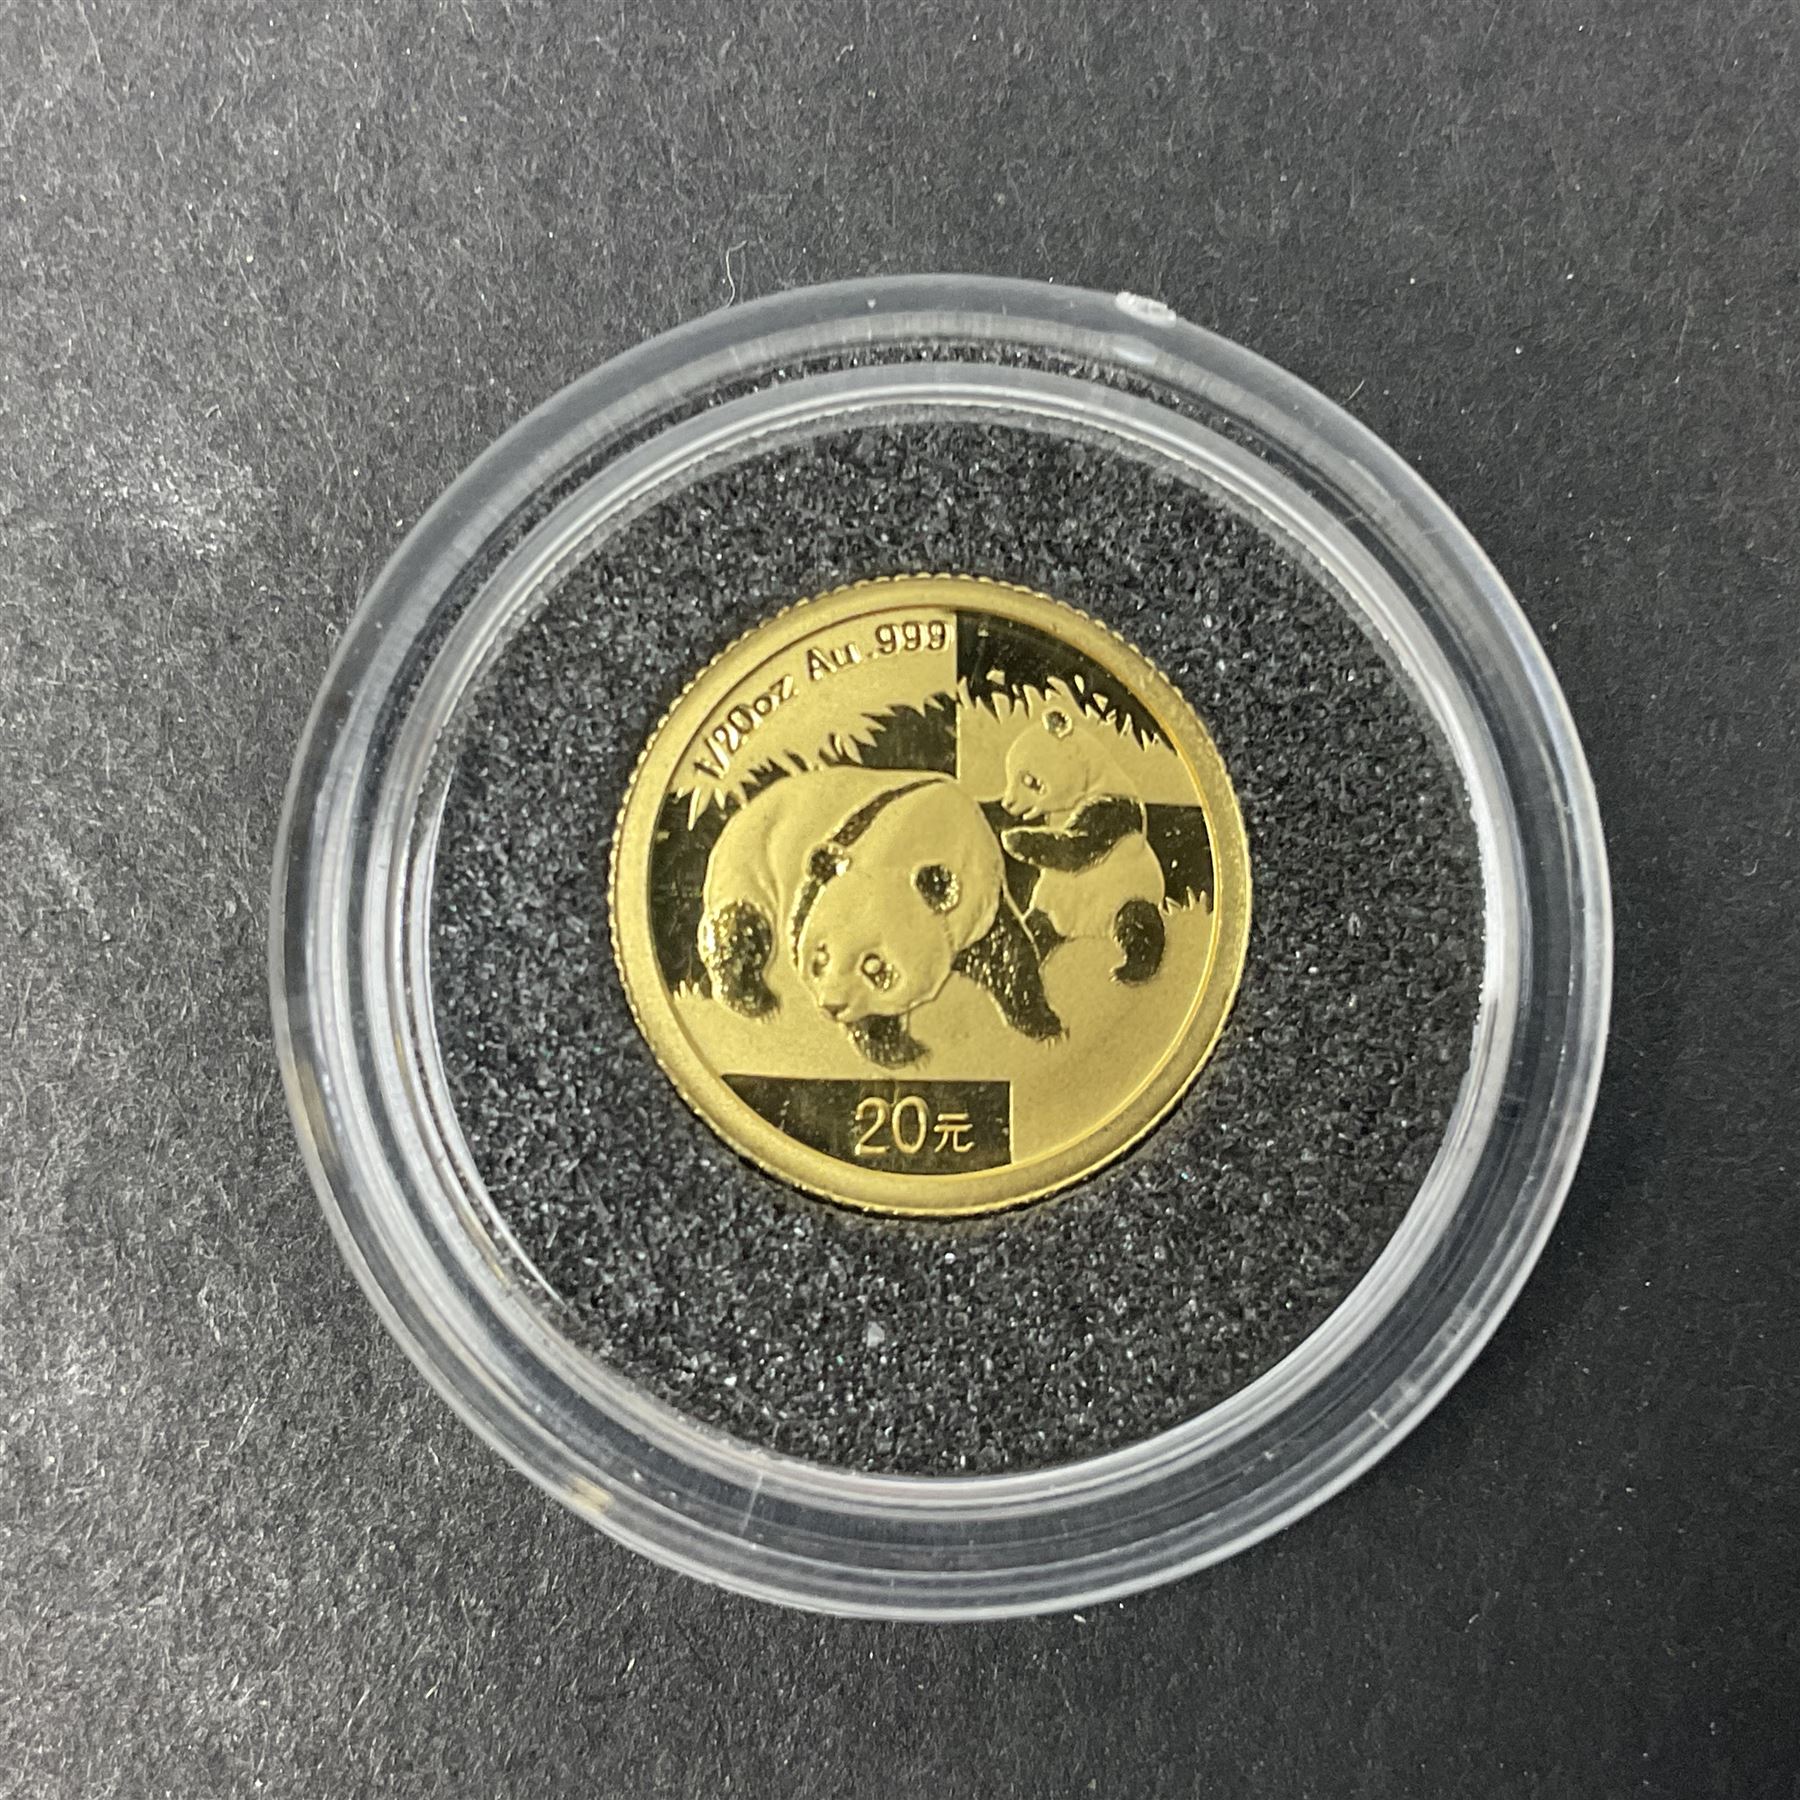 China 2008 1/20 ounce fine gold panda coin - Image 2 of 3